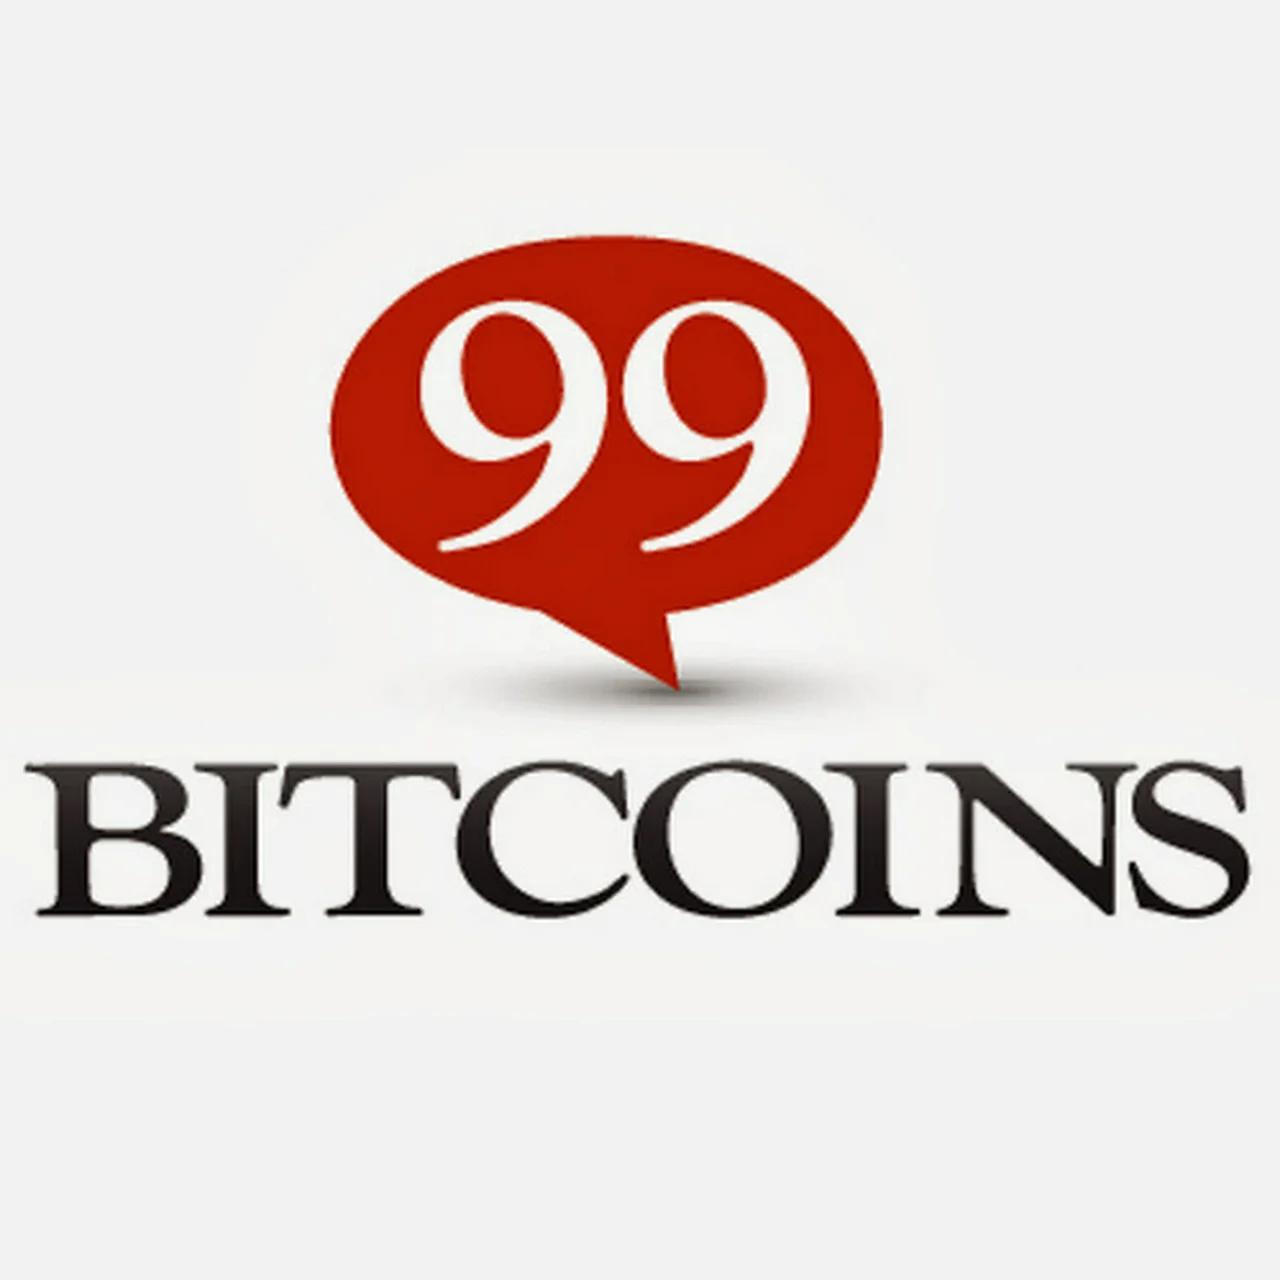 99bitcoins review of related